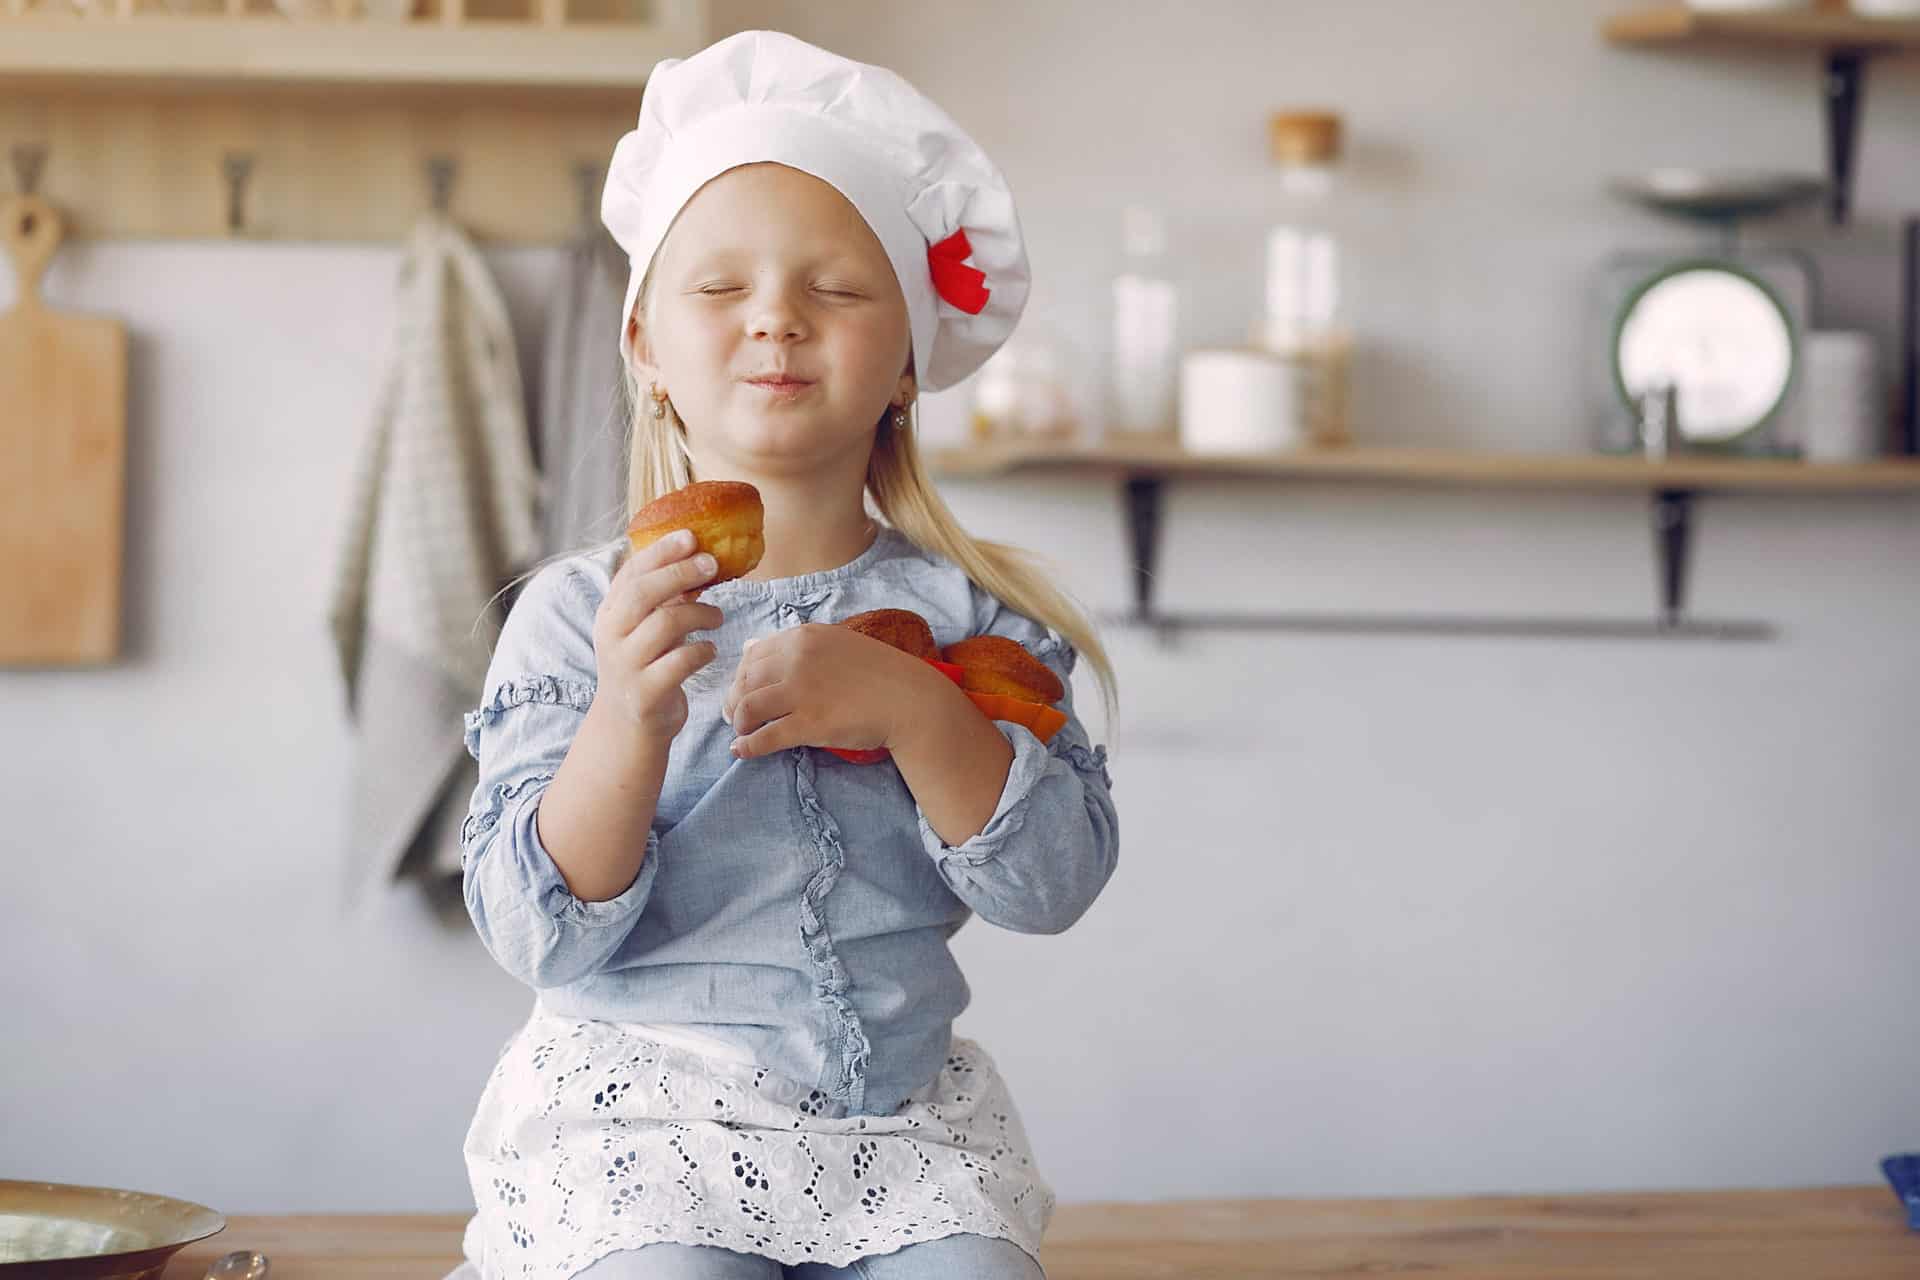 Little girl in a kitchen. Child with a cupcakes. Kid in a shef hat